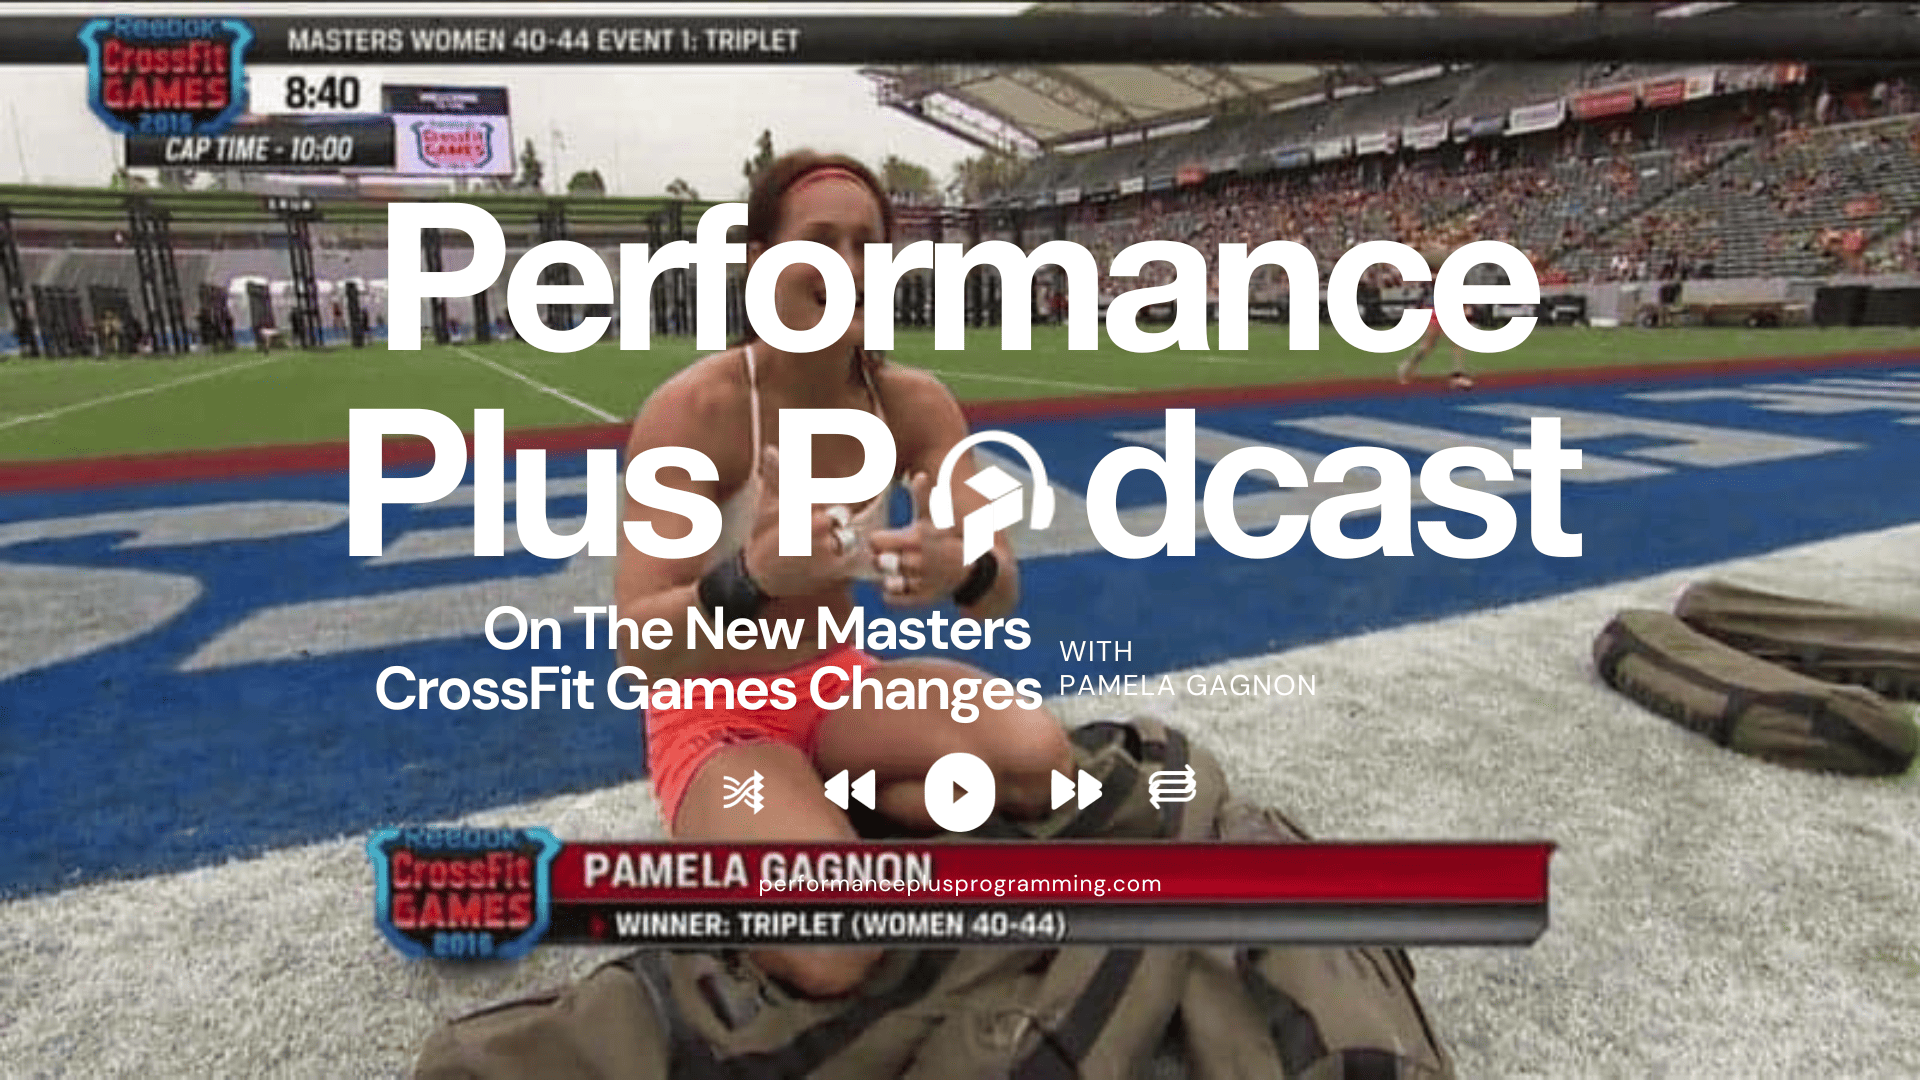 E43 – Pamela Gagnon Talks About The New Masters CrossFit Games Changes